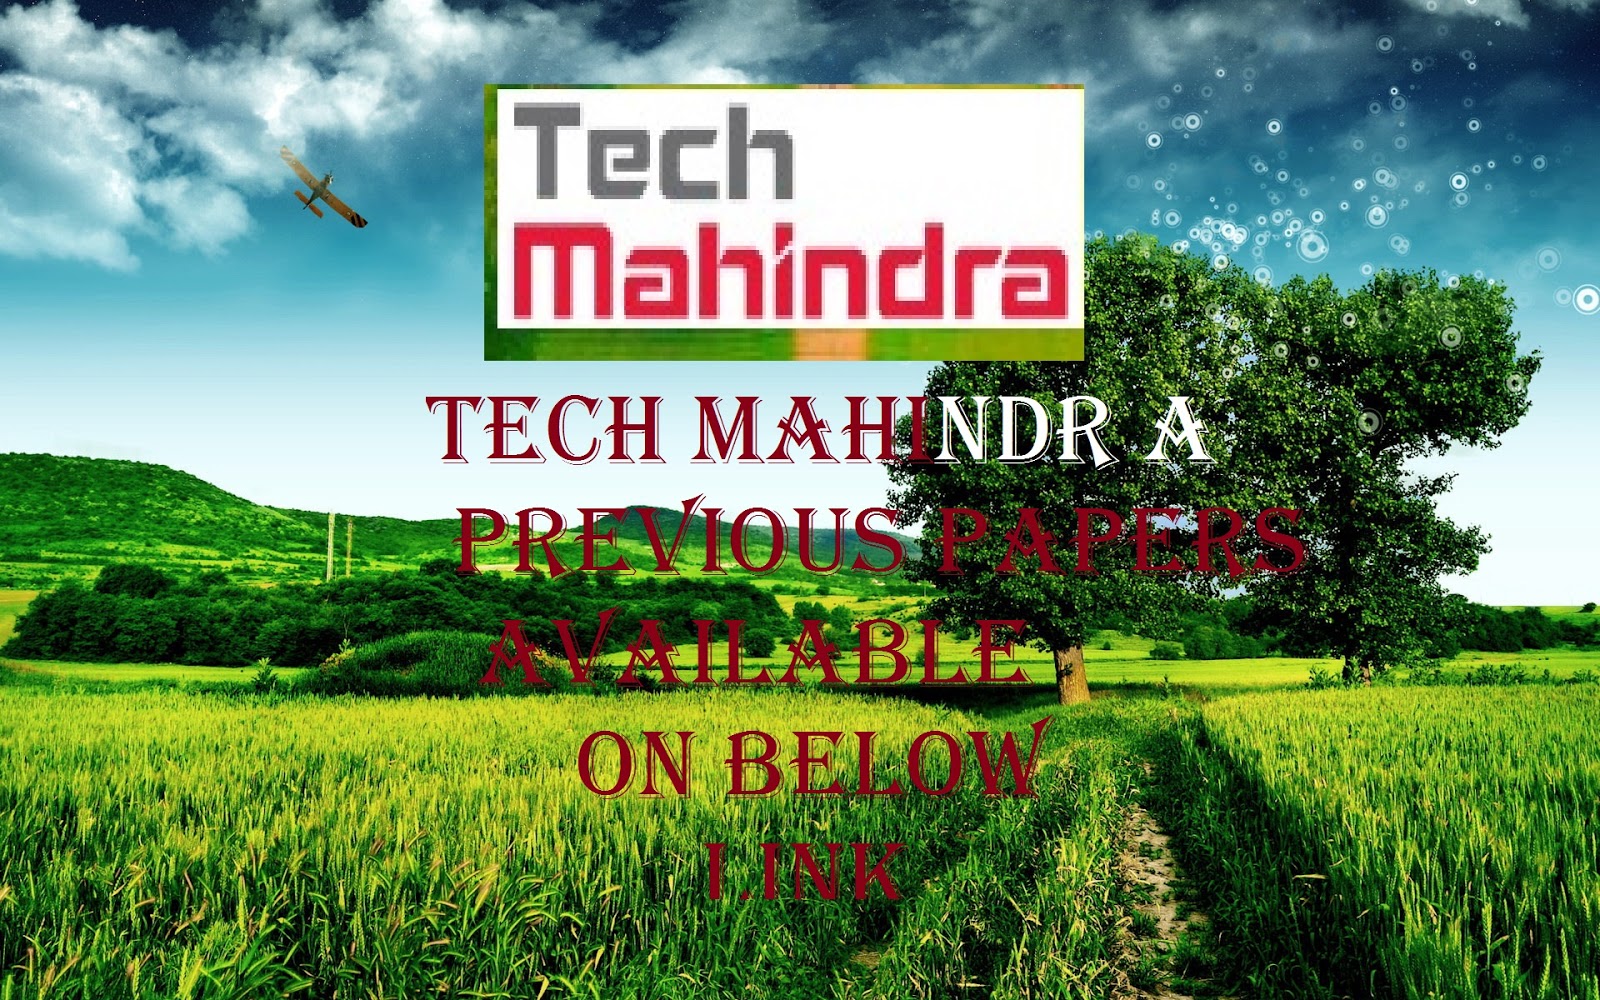 aptitude-and-reasoning-tech-mahindra-campus-interview-papers